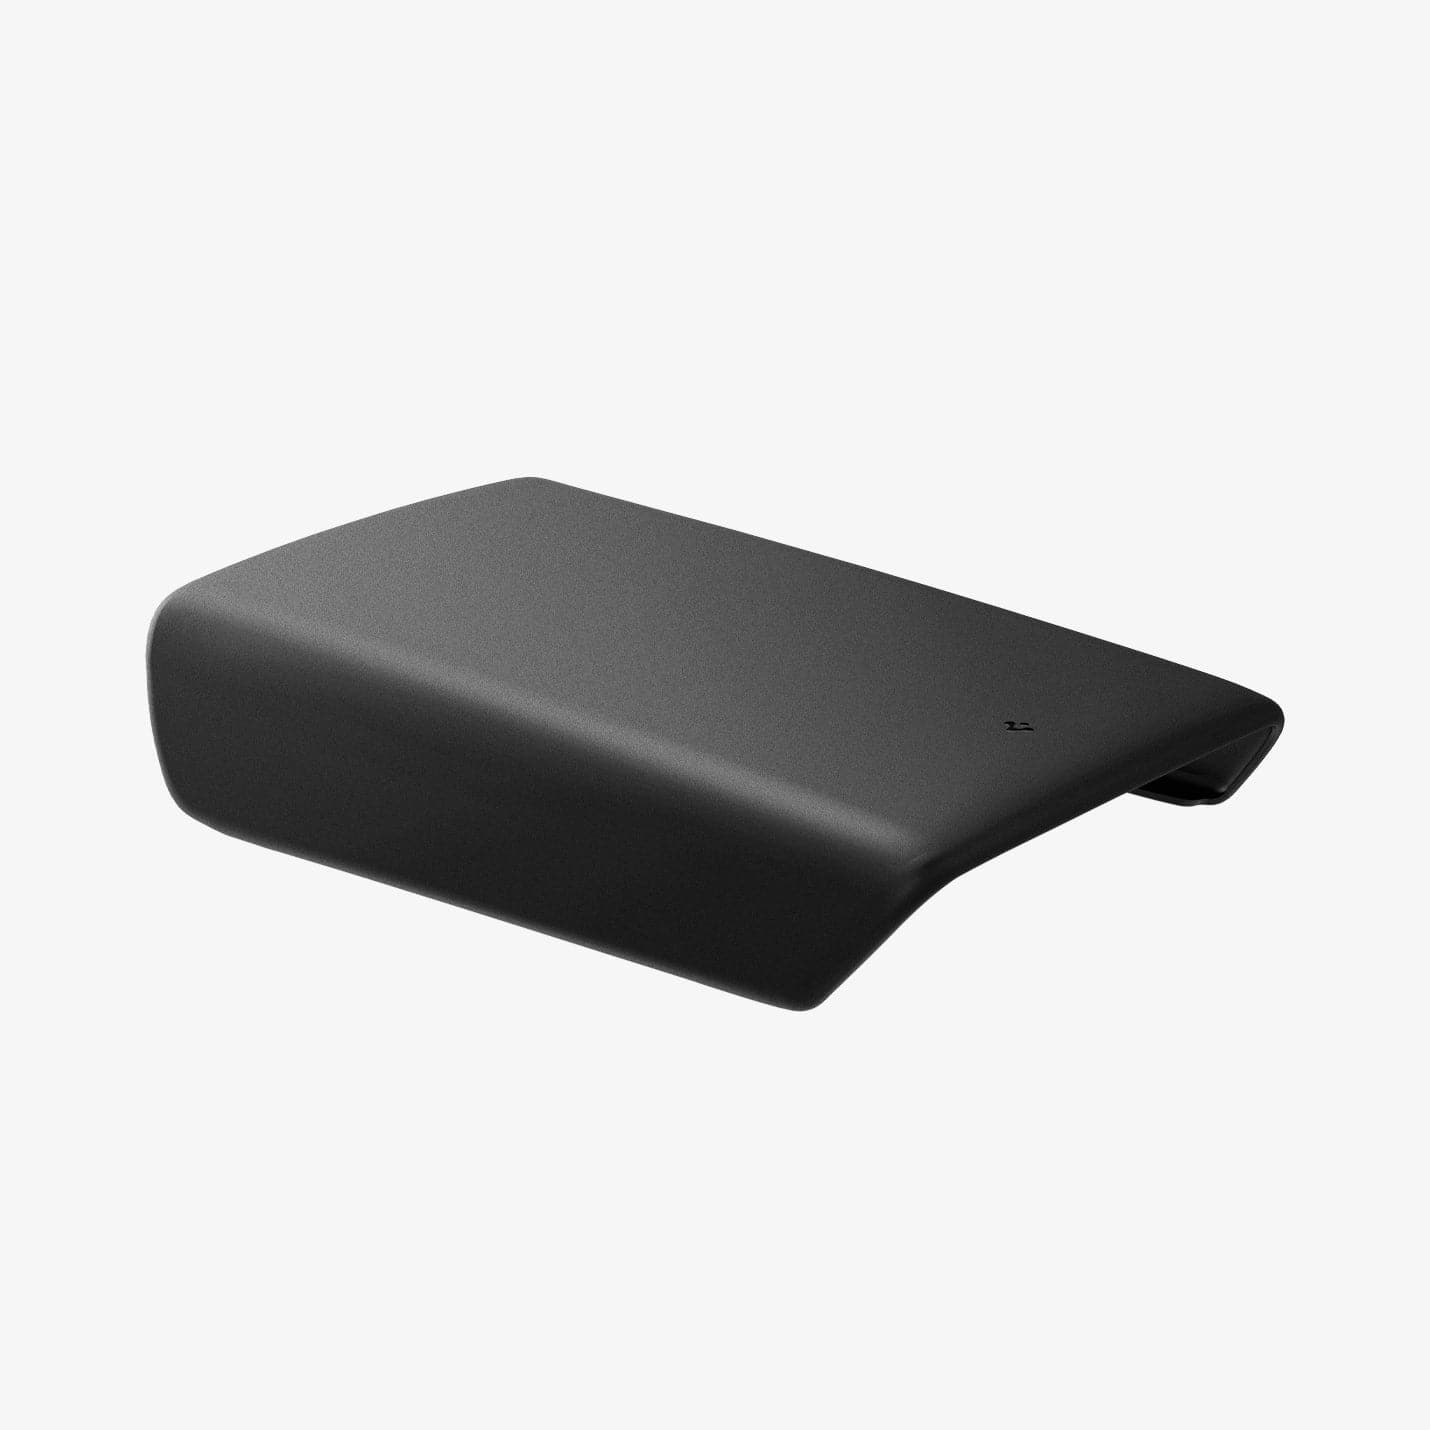 ACP06042 - Tesla Model 3 & Y Armrest Cover in black showing the top and side